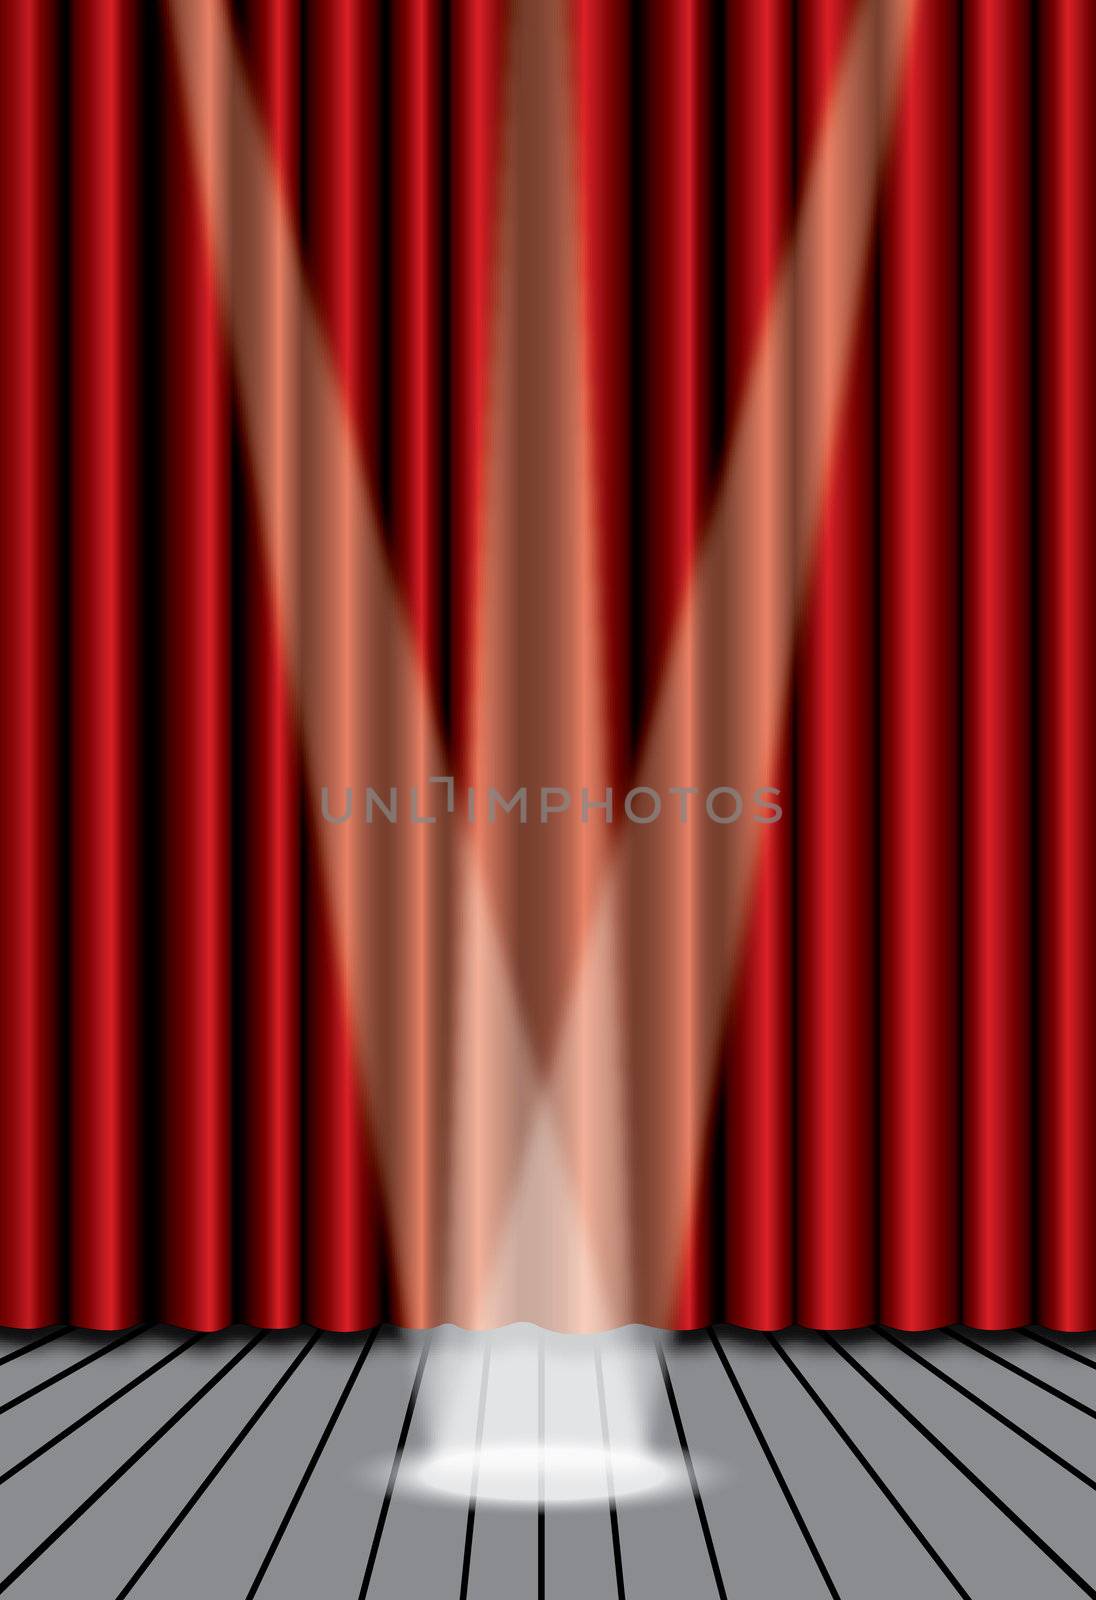 Red theater curtain with spotlight on stage,